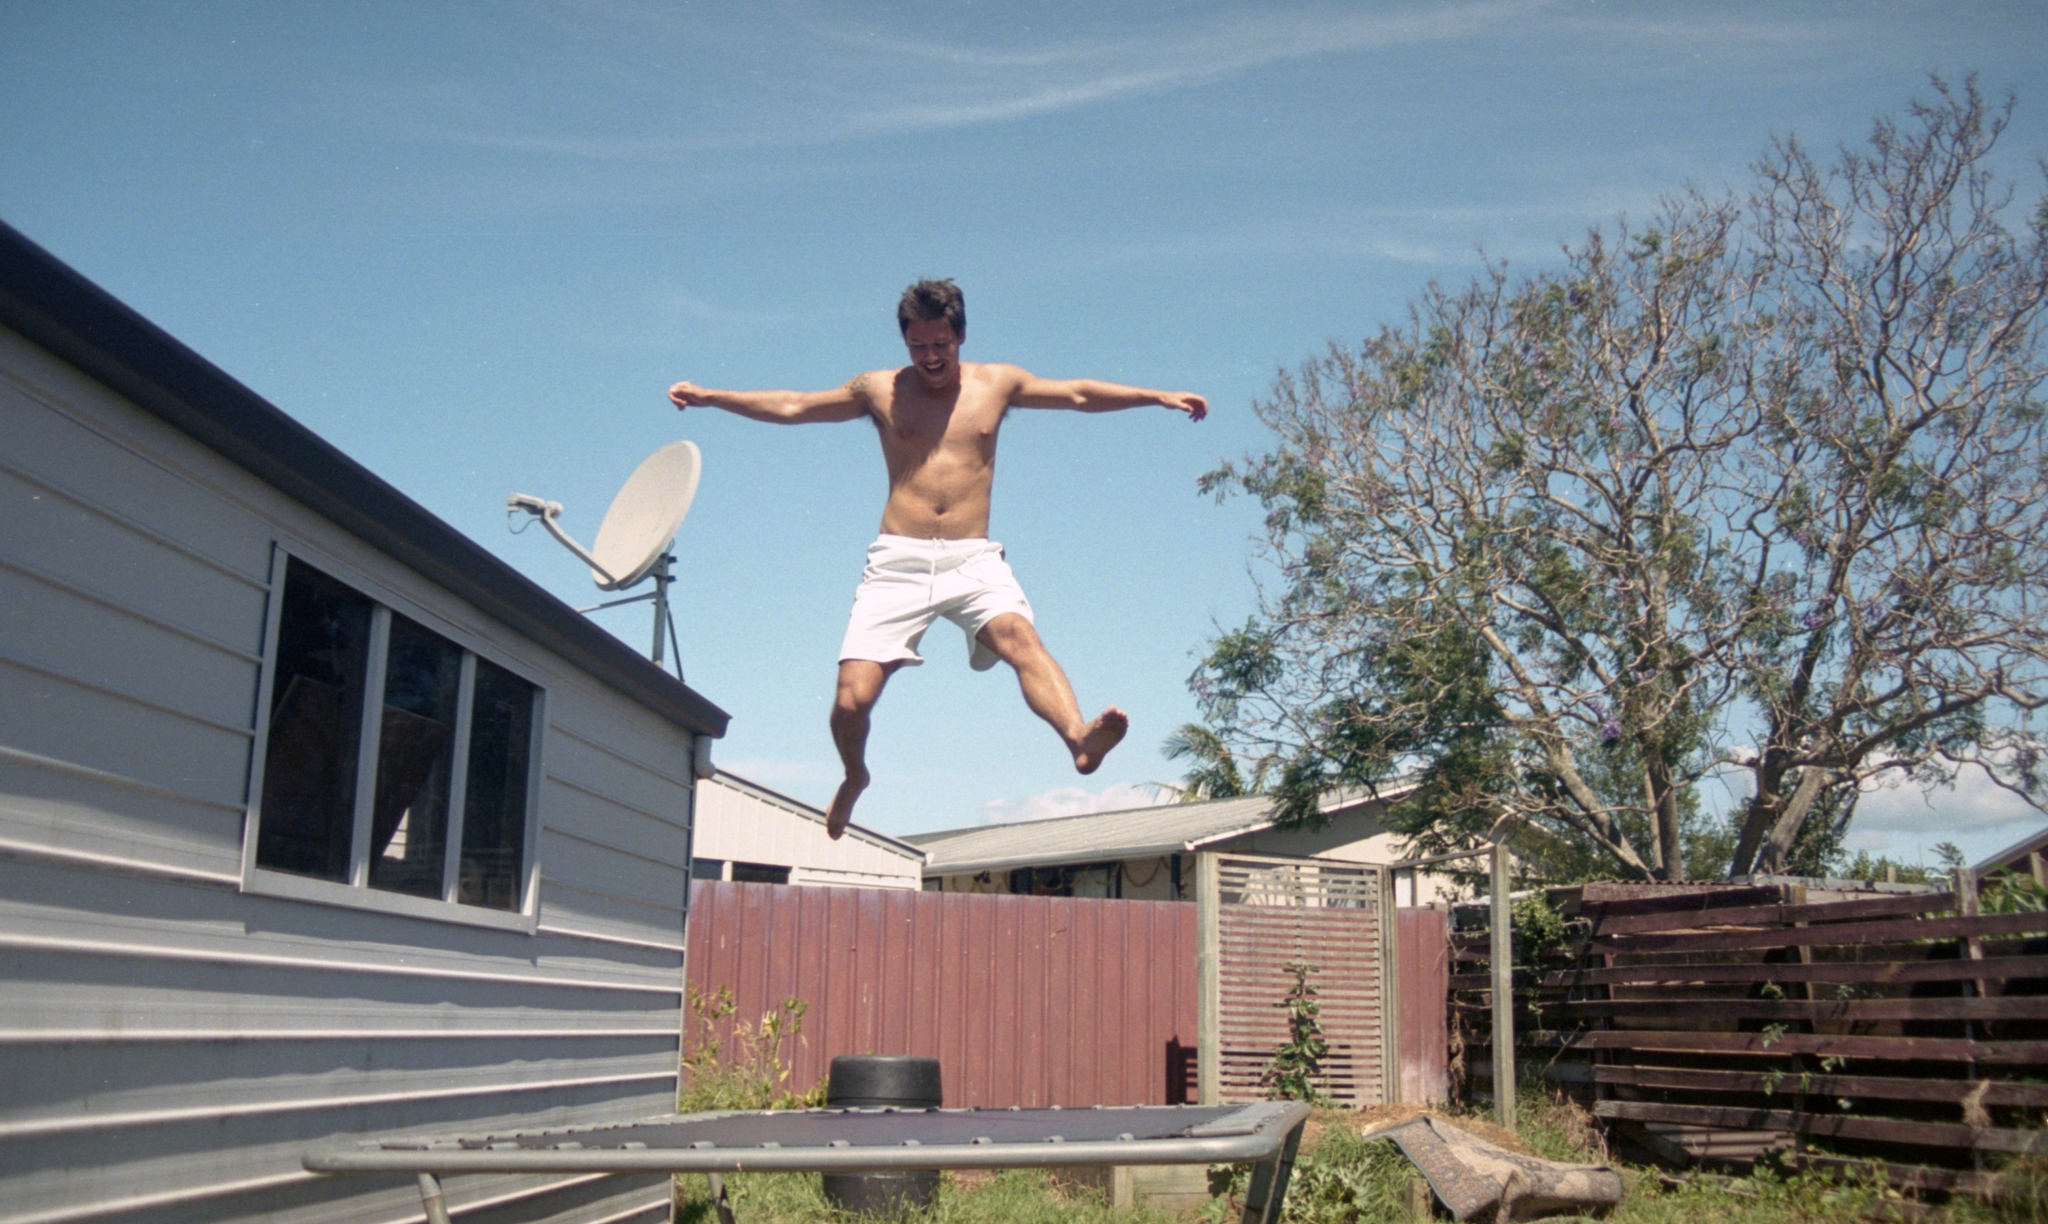 Young man jumps on trampoline on a bright blue day. 